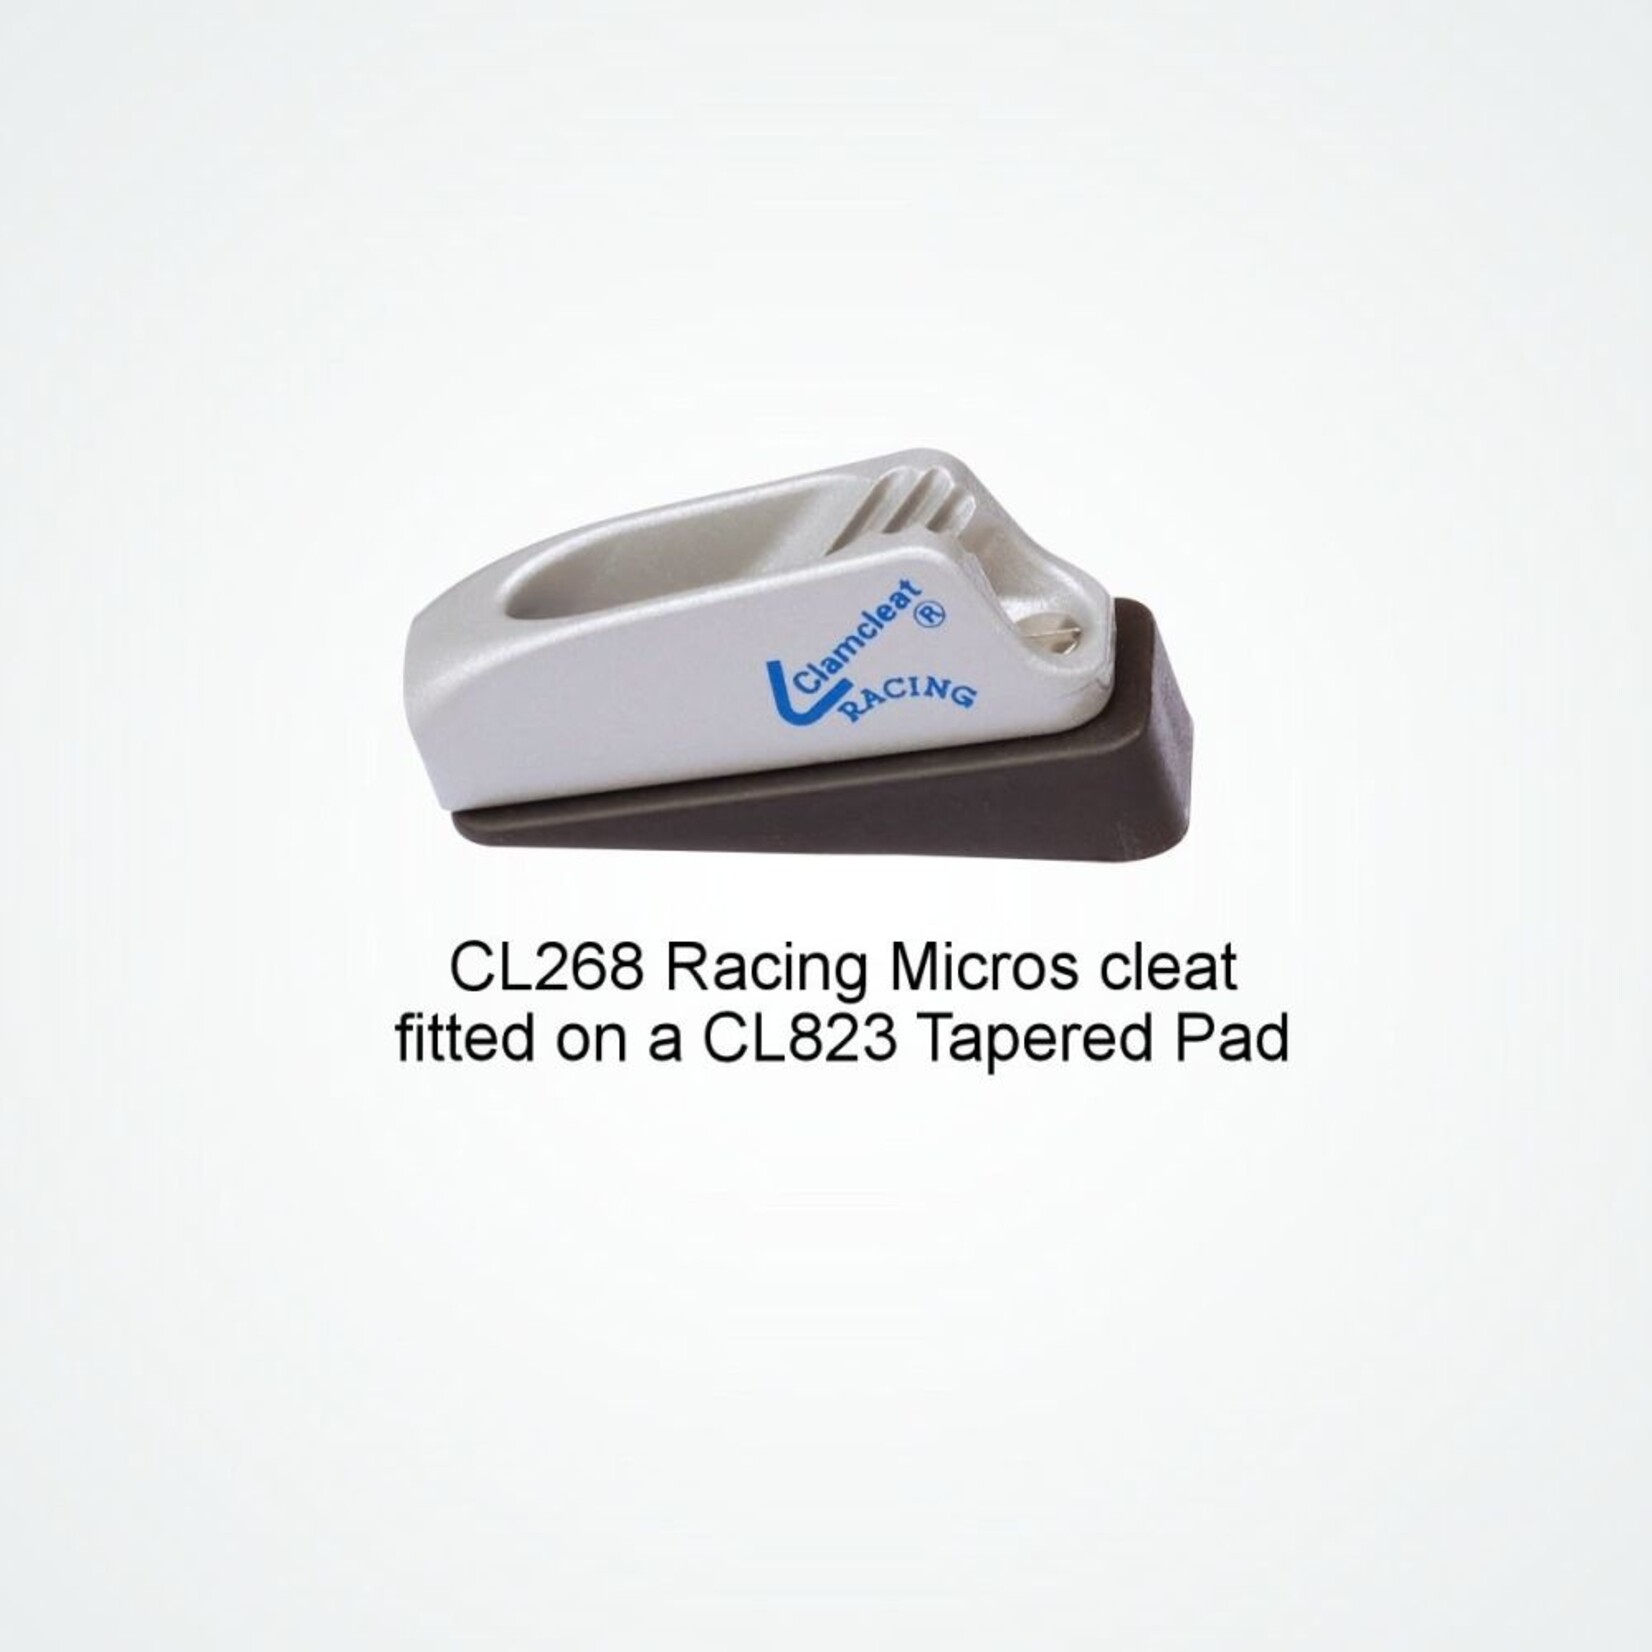 Clamcleat Tapered Pad for CL263. CL268 etc.